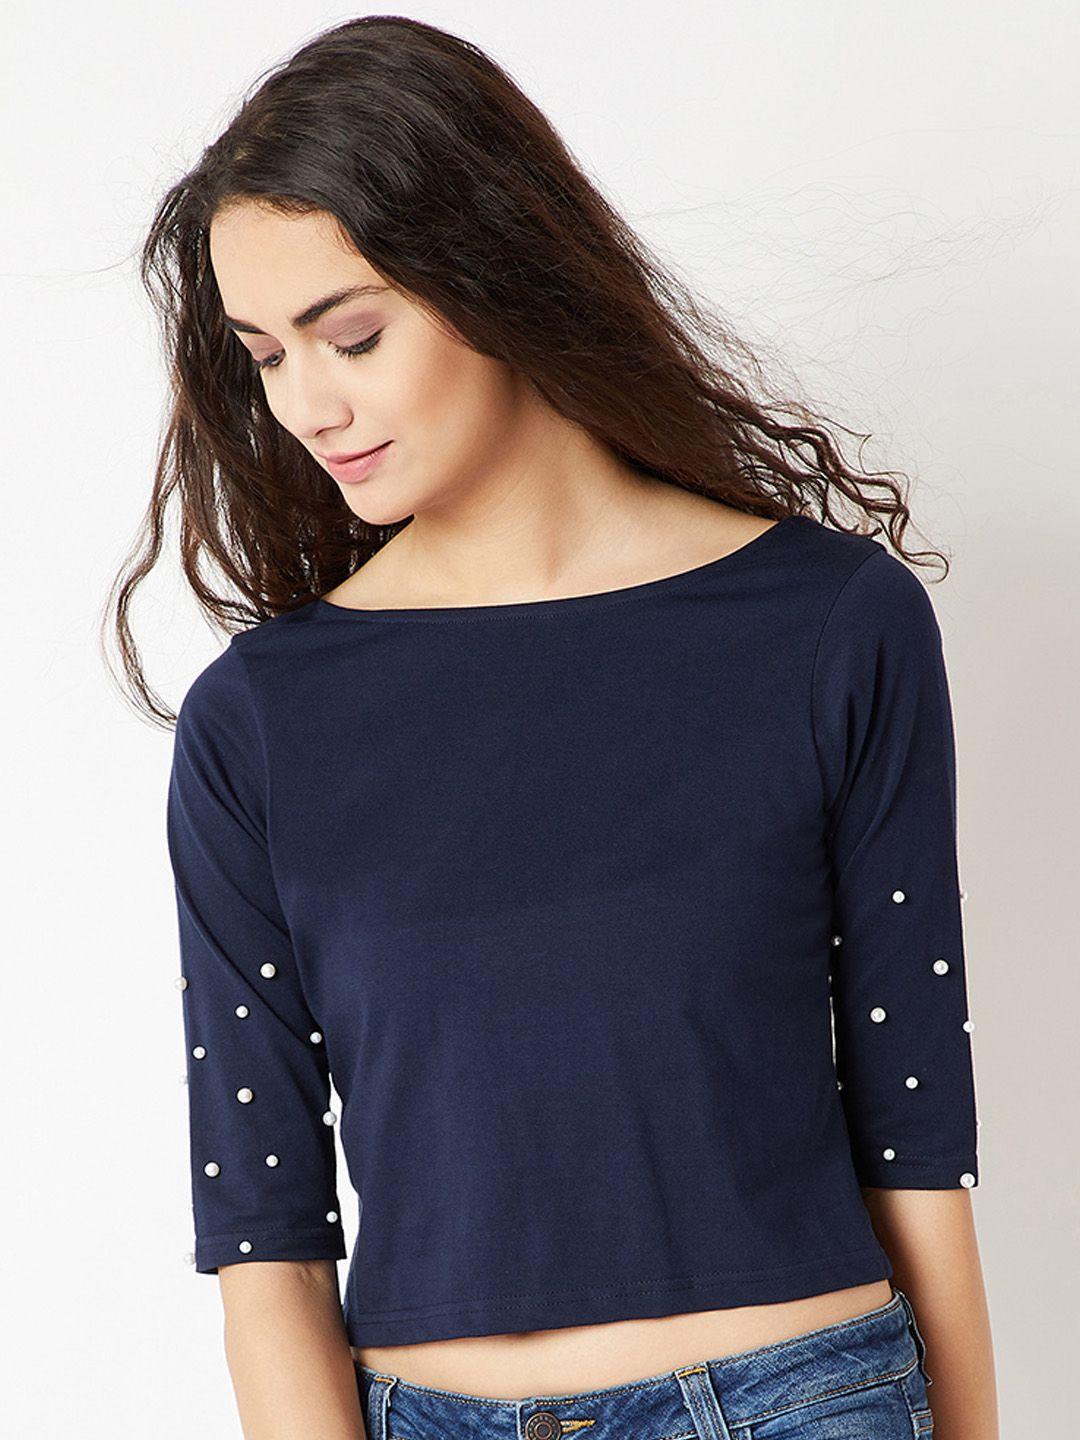 miss-chase-women-navy-blue-embellished-top